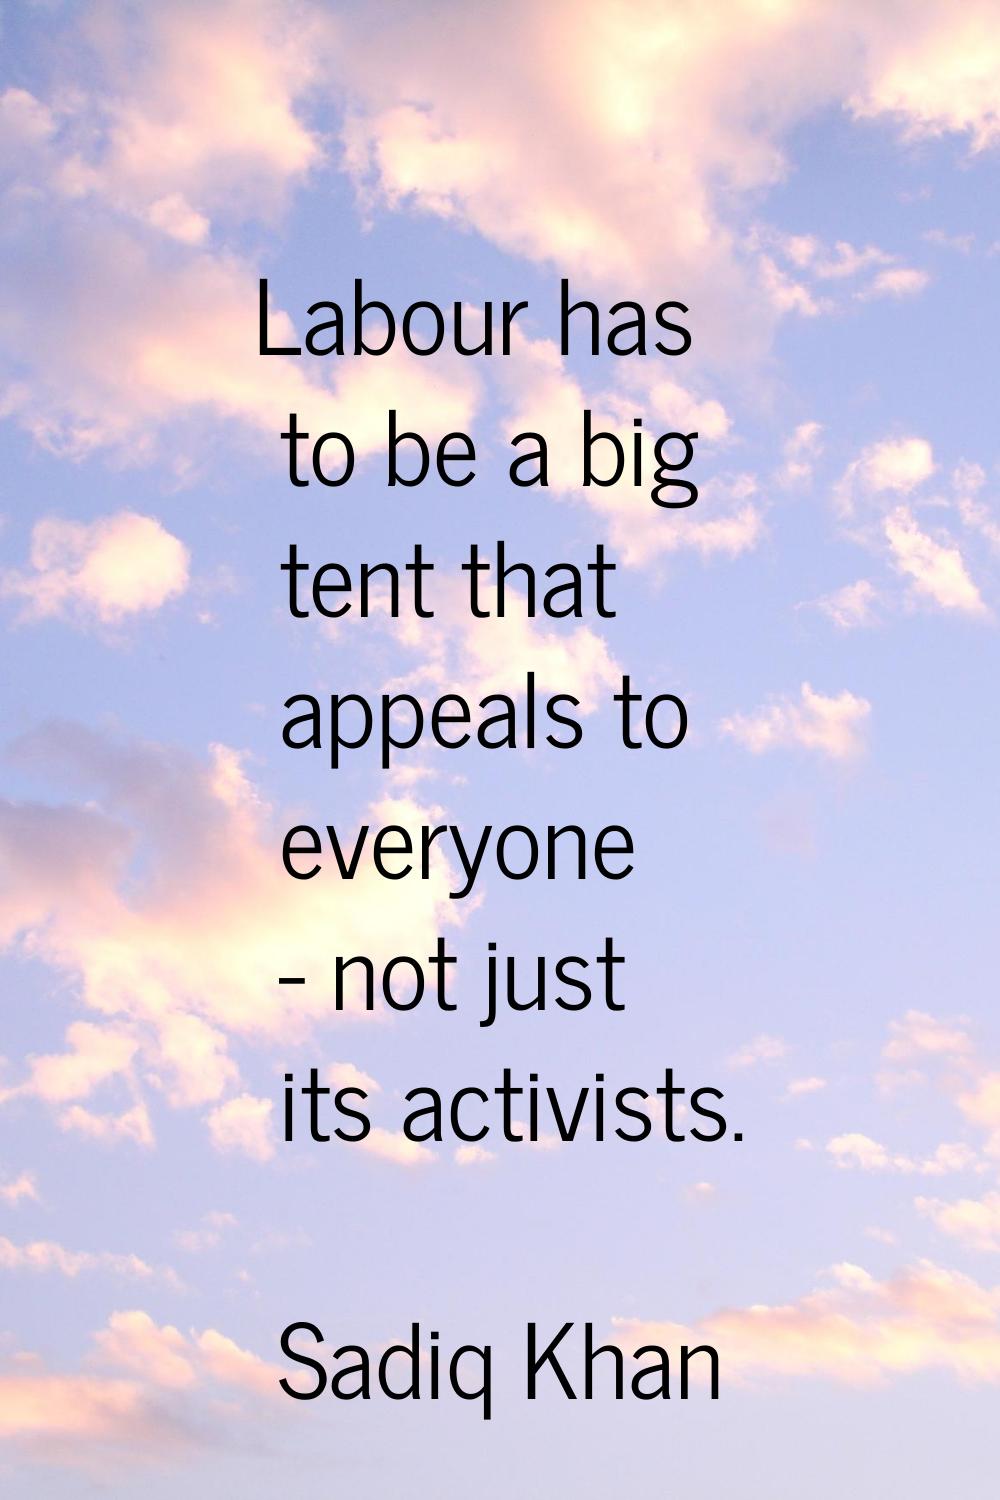 Labour has to be a big tent that appeals to everyone - not just its activists.